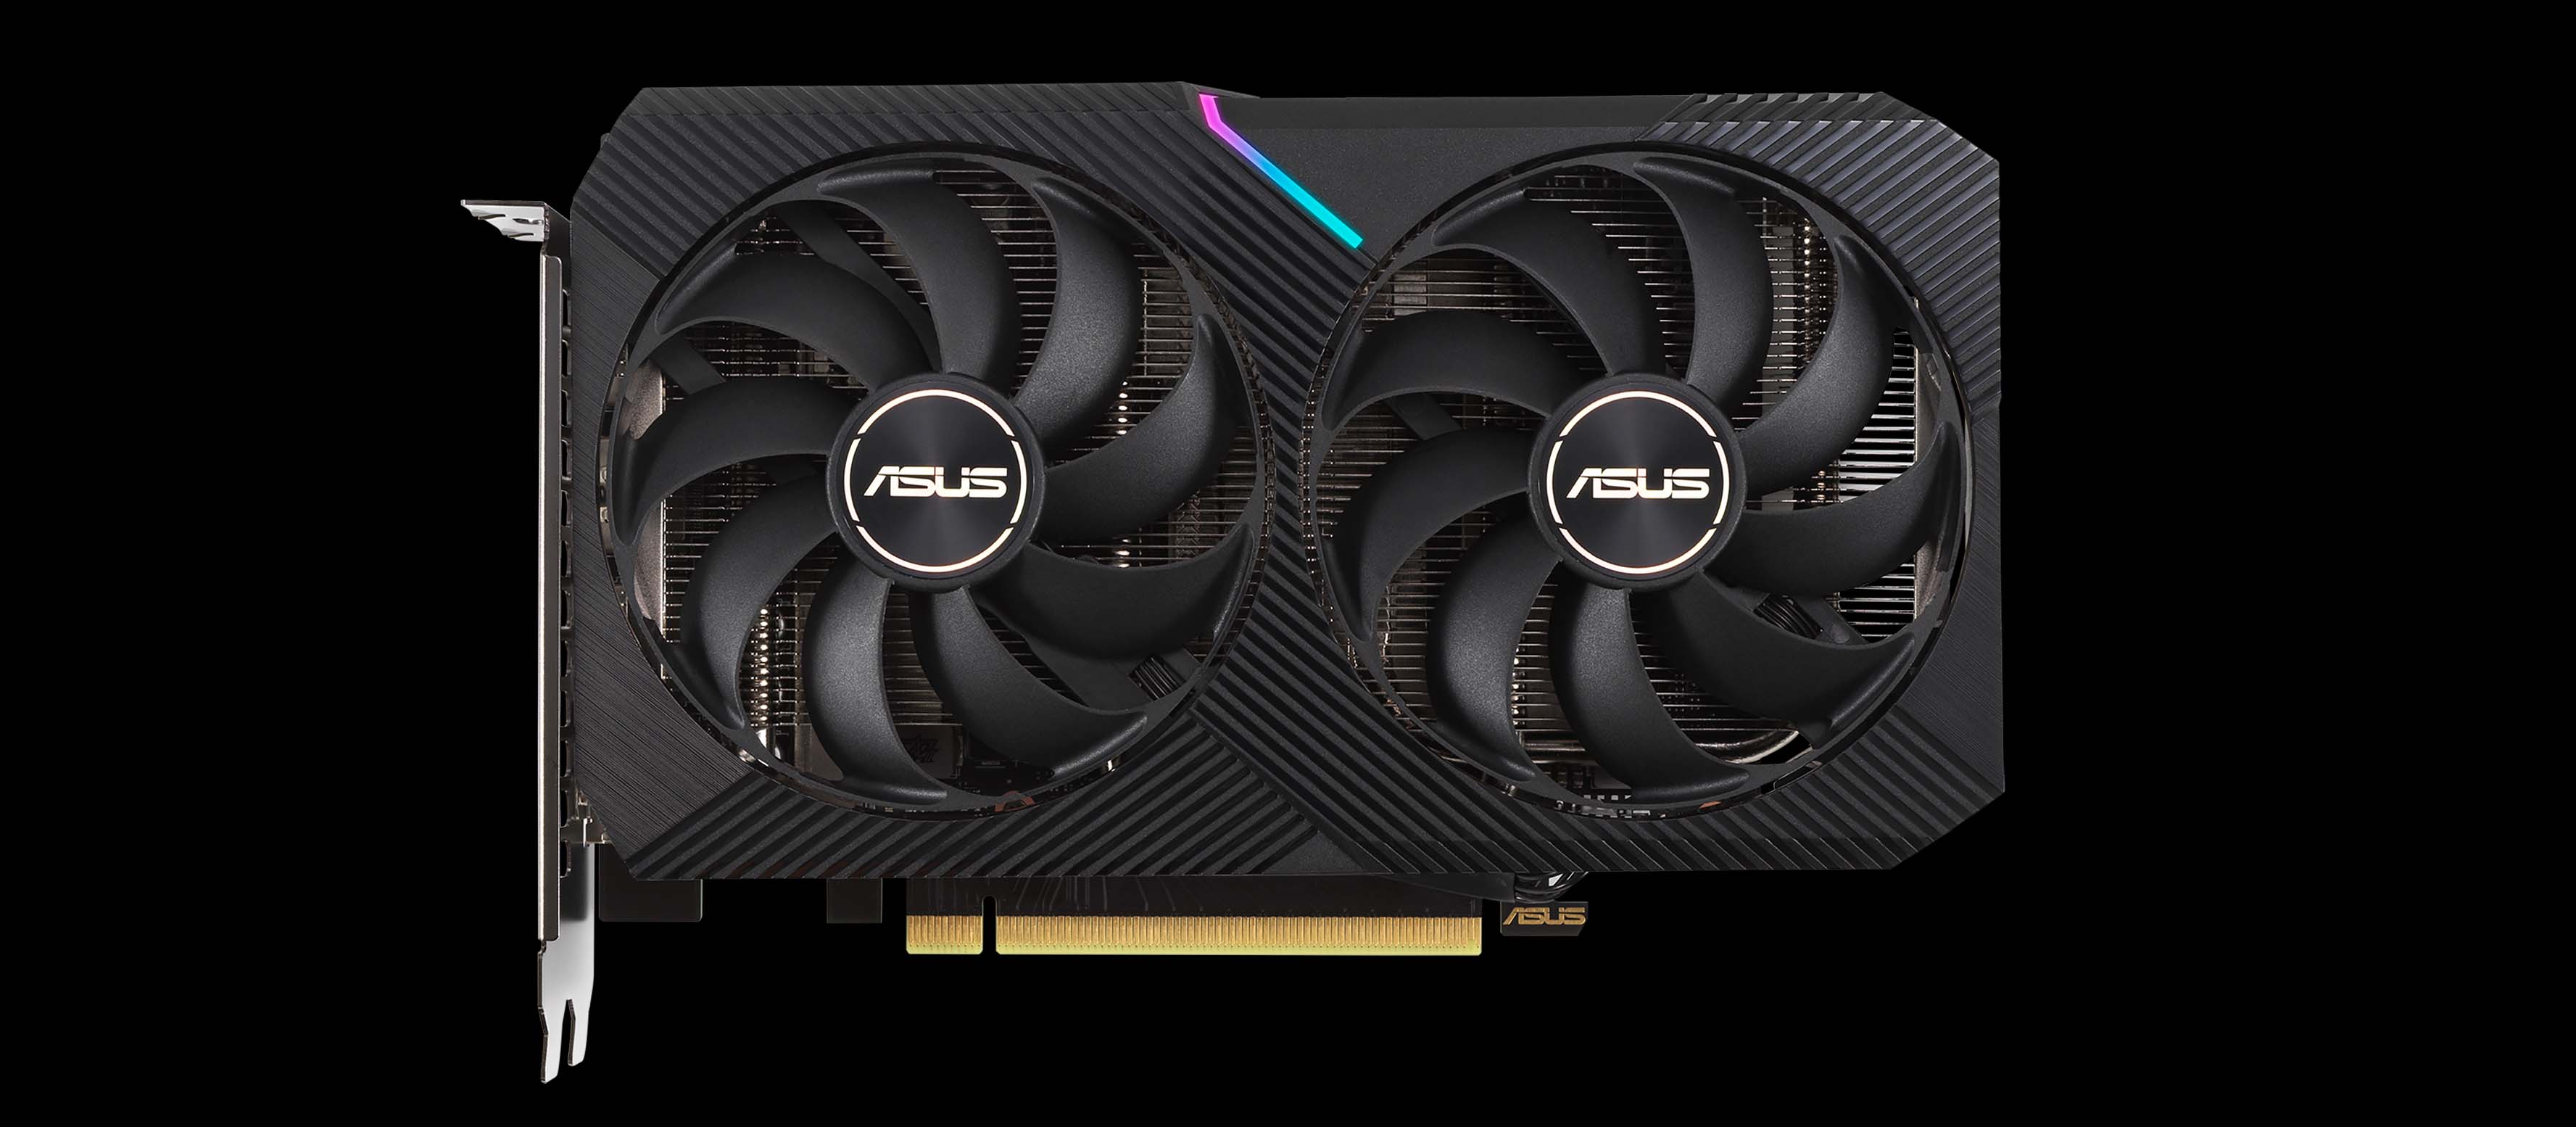 An image of a dual-fan ASUS Dual RTX 3050 graphics card on a black background.